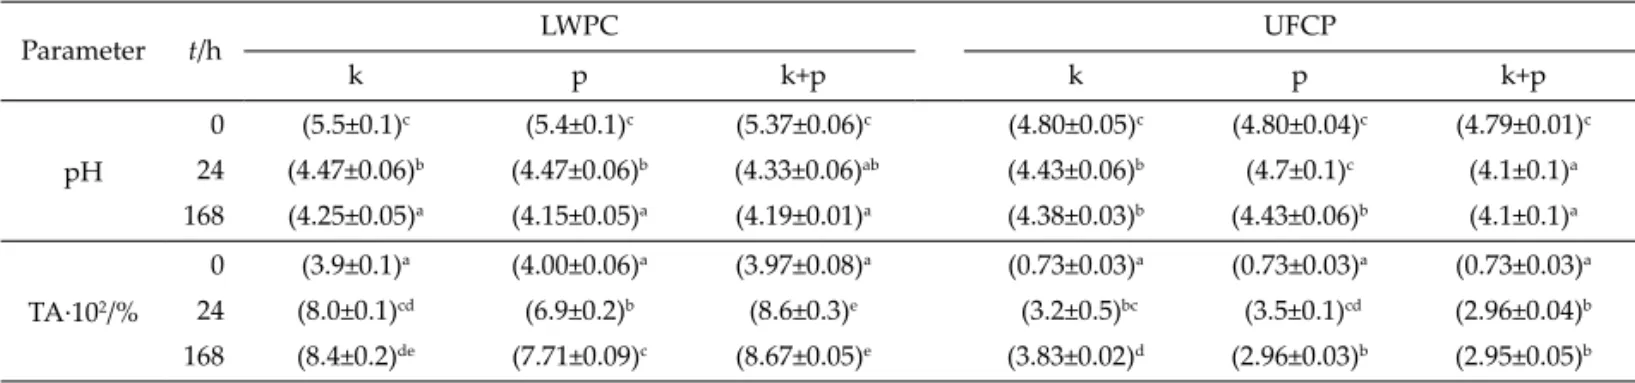 Table 2. The pH and titratable acidity during fermentation and storage of whey drinks produced using liquid whey protein concen- concen-trates and ultrafi ltrated and concentrated permeates with kefi r grains, commercial mix of probiotics, and kefi r grain